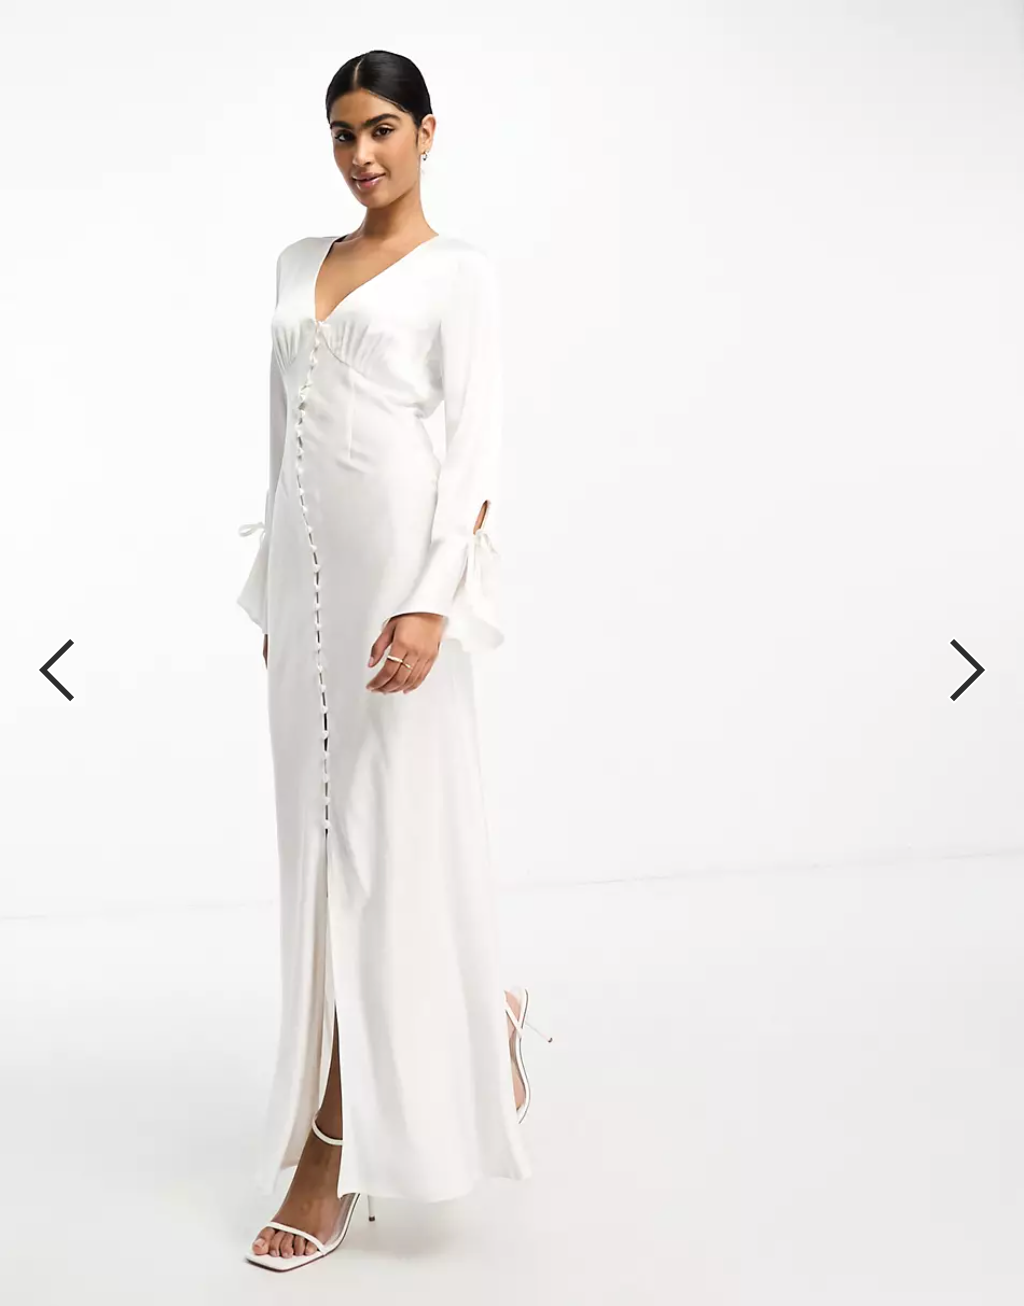 ASOS Never Fully Dressed Bridal satin maxi dress in ivory - 6